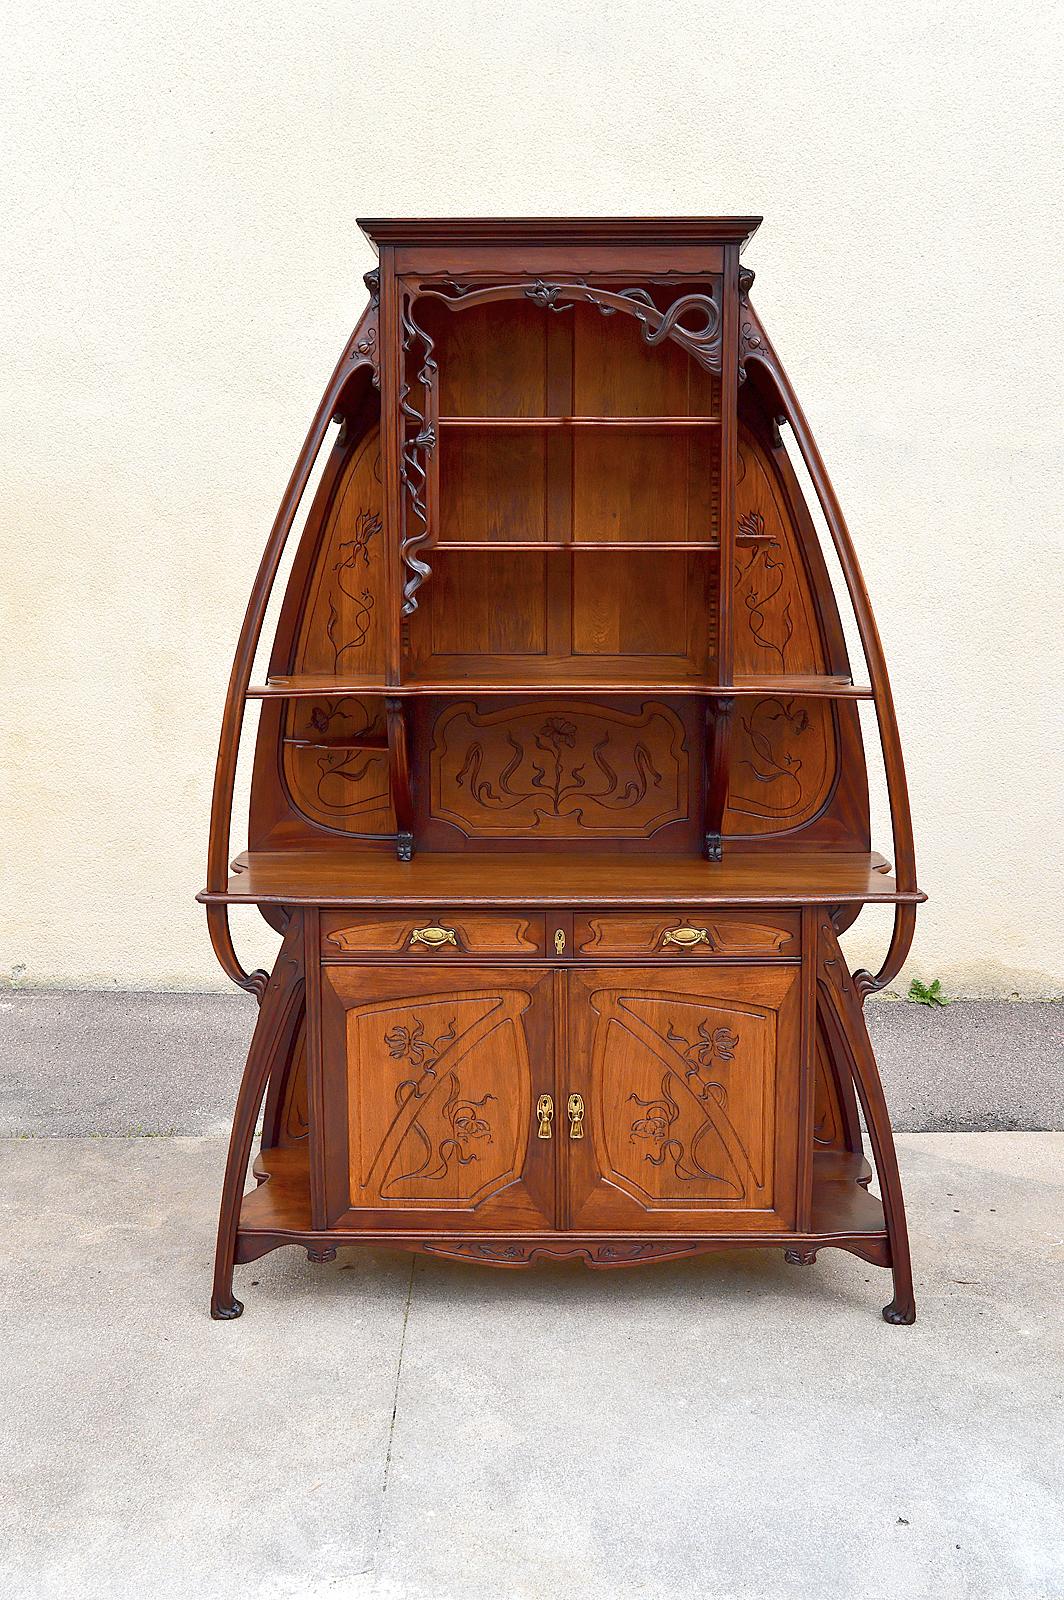 Sublime sideboard / cabinet / buffet two asymmetrical bodies and richly carved with flowers.

The free form of the sideboard and the work in wood and bronzes are typical of early Art Nouveau.

Mahogany structure, oak panels.
Bronze handles and